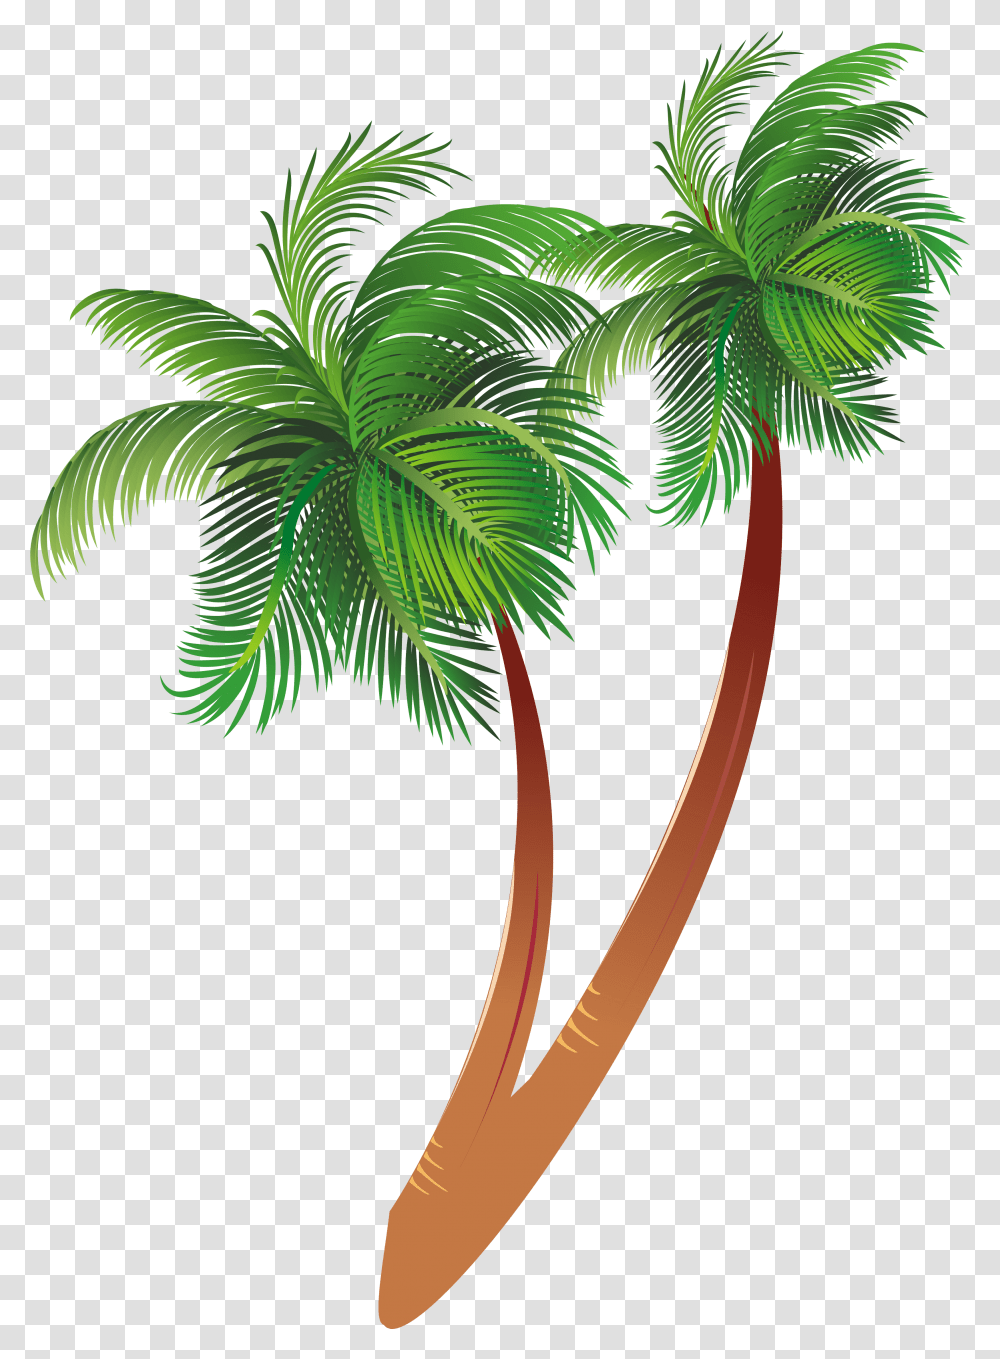 Free Download Cartoon Palm Tree Clipart Coconut Palm Background Coconut Tree Clipart Transparent Png